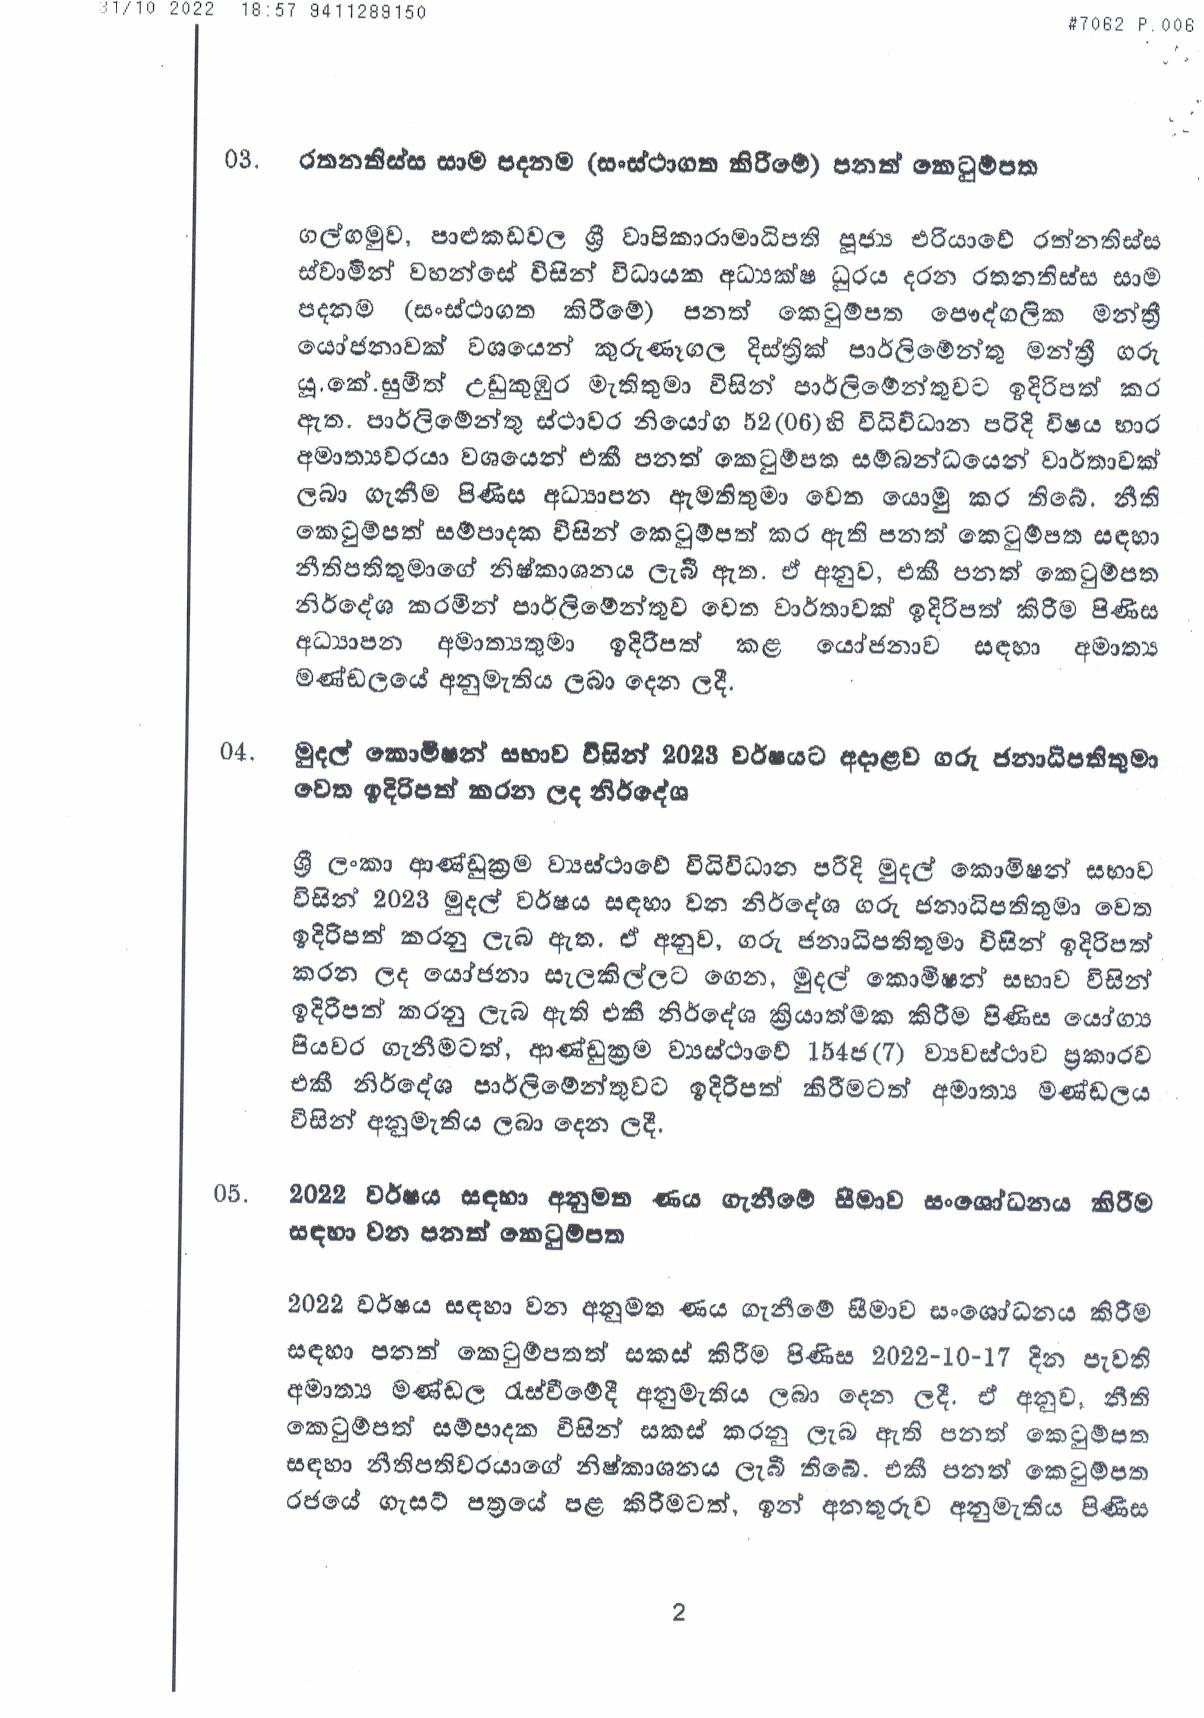 Cabinet Decisions on 31.10.2022 1 page 002